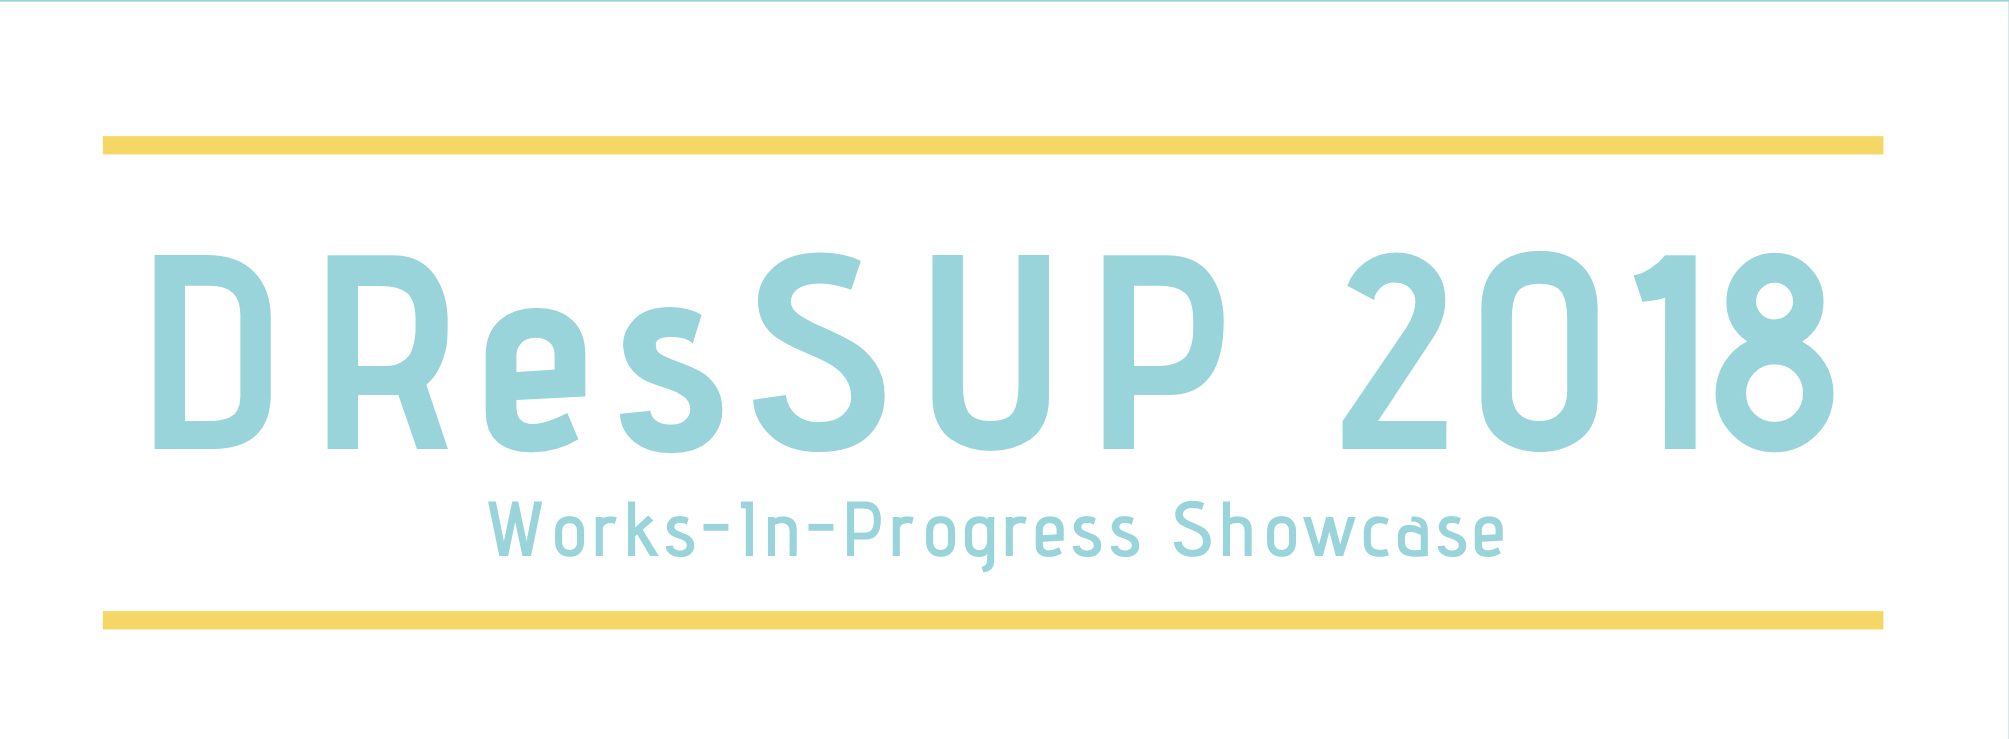 DResSUP 2018 Works-In-Progress Showcase. An informal celebration featuring digital research projects of eleven UCLA grad students